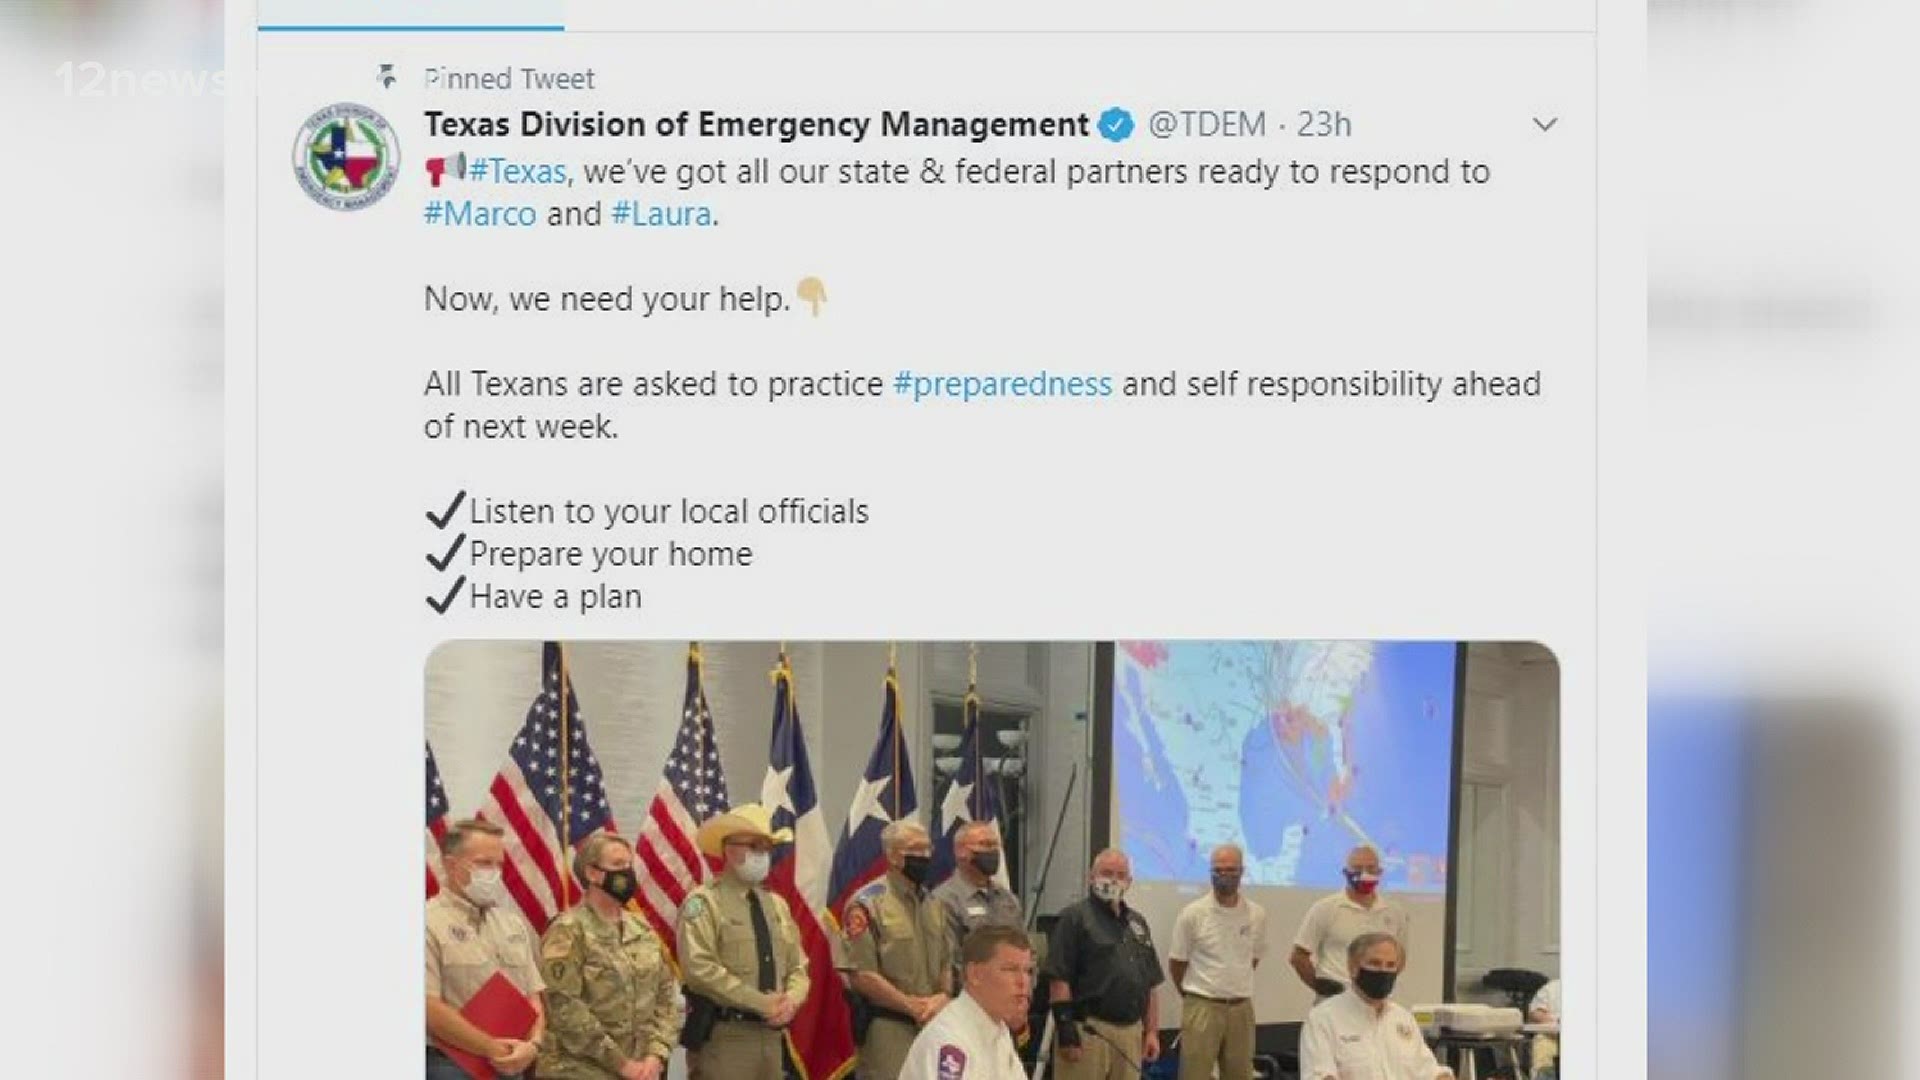 Different agencies across Texas are preparing for Hurricane Laura. Many have been deployed to the coast.